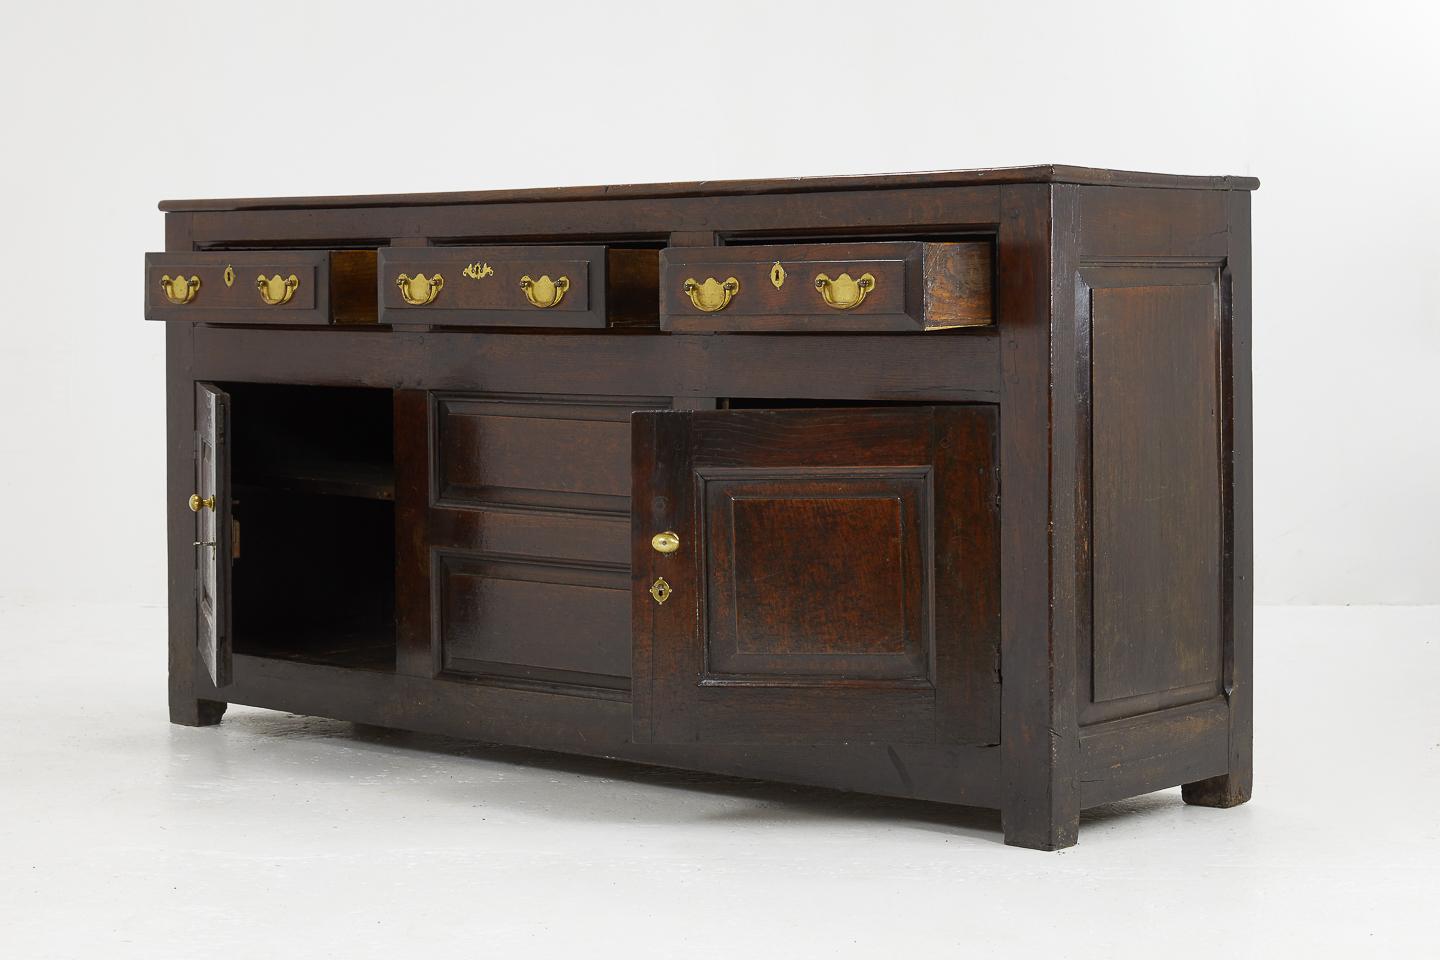 English 18th century oak dresser base. Very difficult to find one with such fabulous color and patina. It would fit comfortably into a contemporary interior.